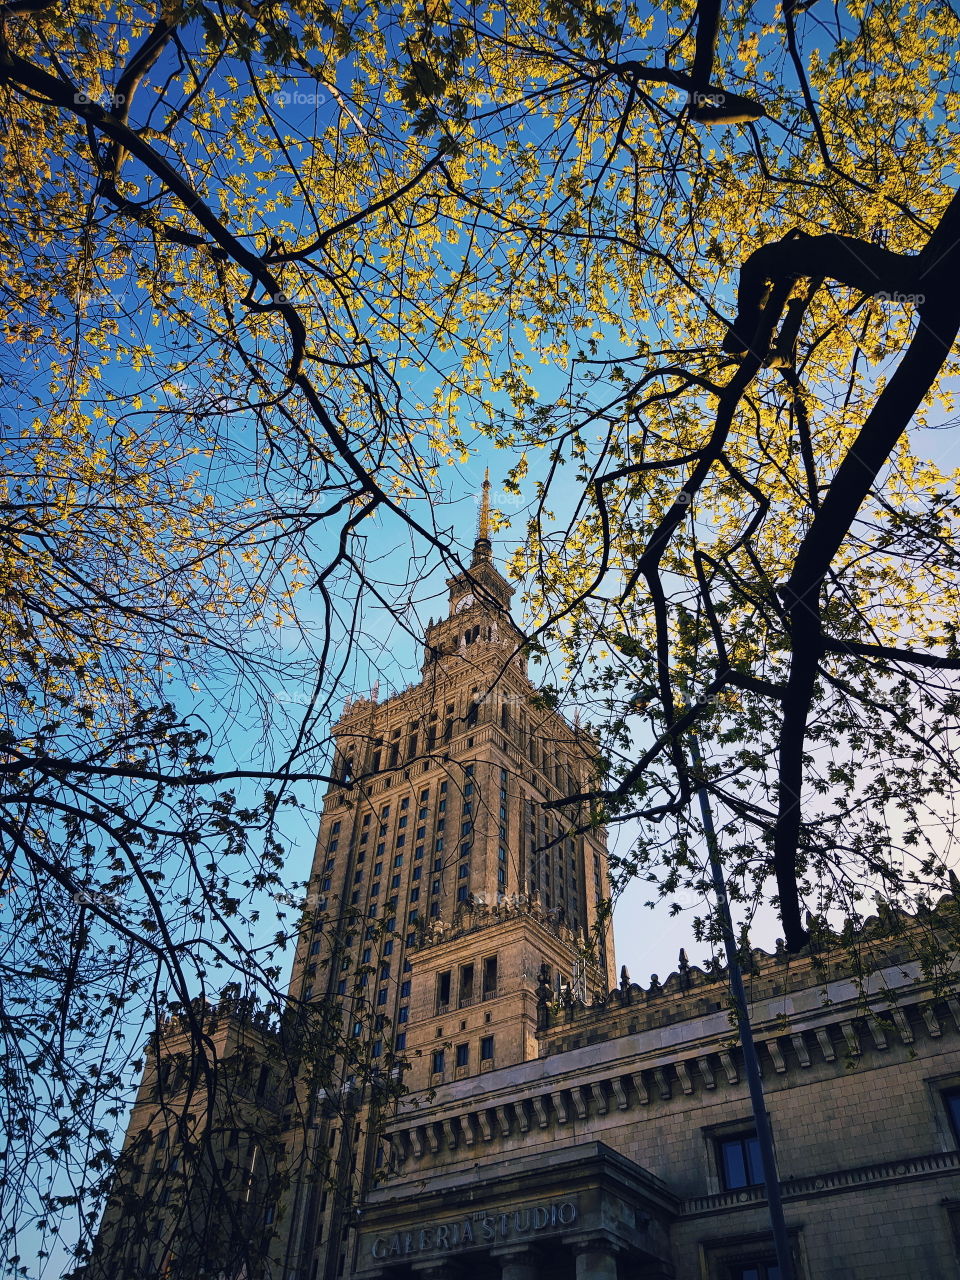 Looking up towards the Palace of Culture and Science through trees on a spring afternoon.